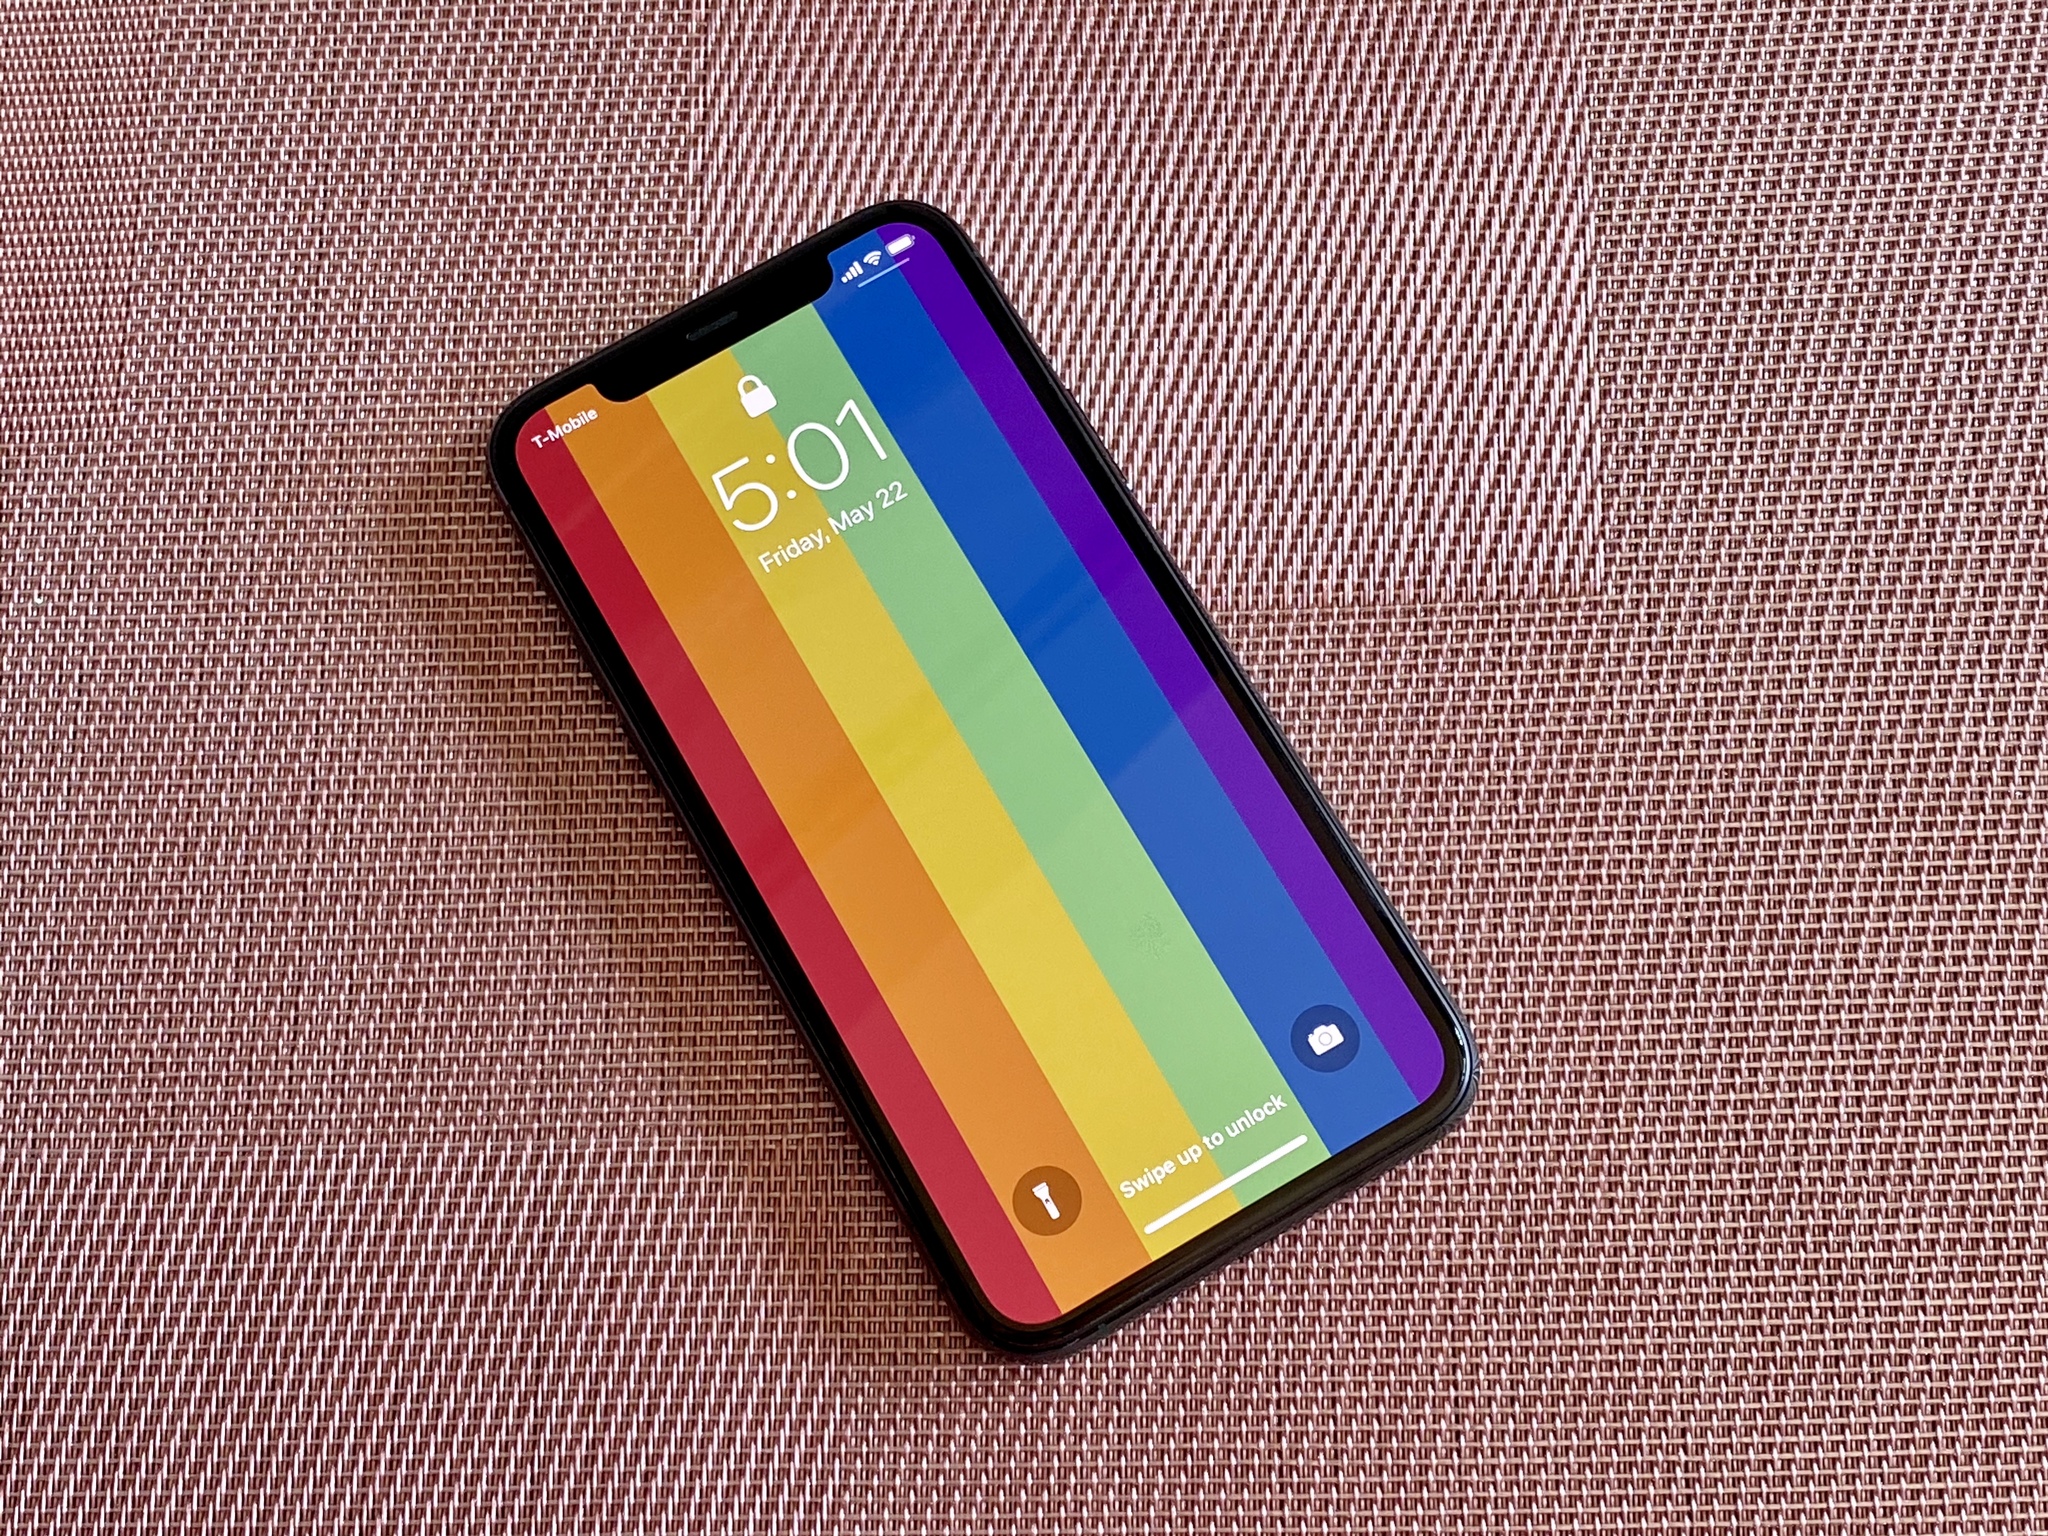 Apple Pride 2021 White  Wallpapers Central  Rainbow wallpaper iphone  Wallpaper iphone neon Iphone wallpaper images